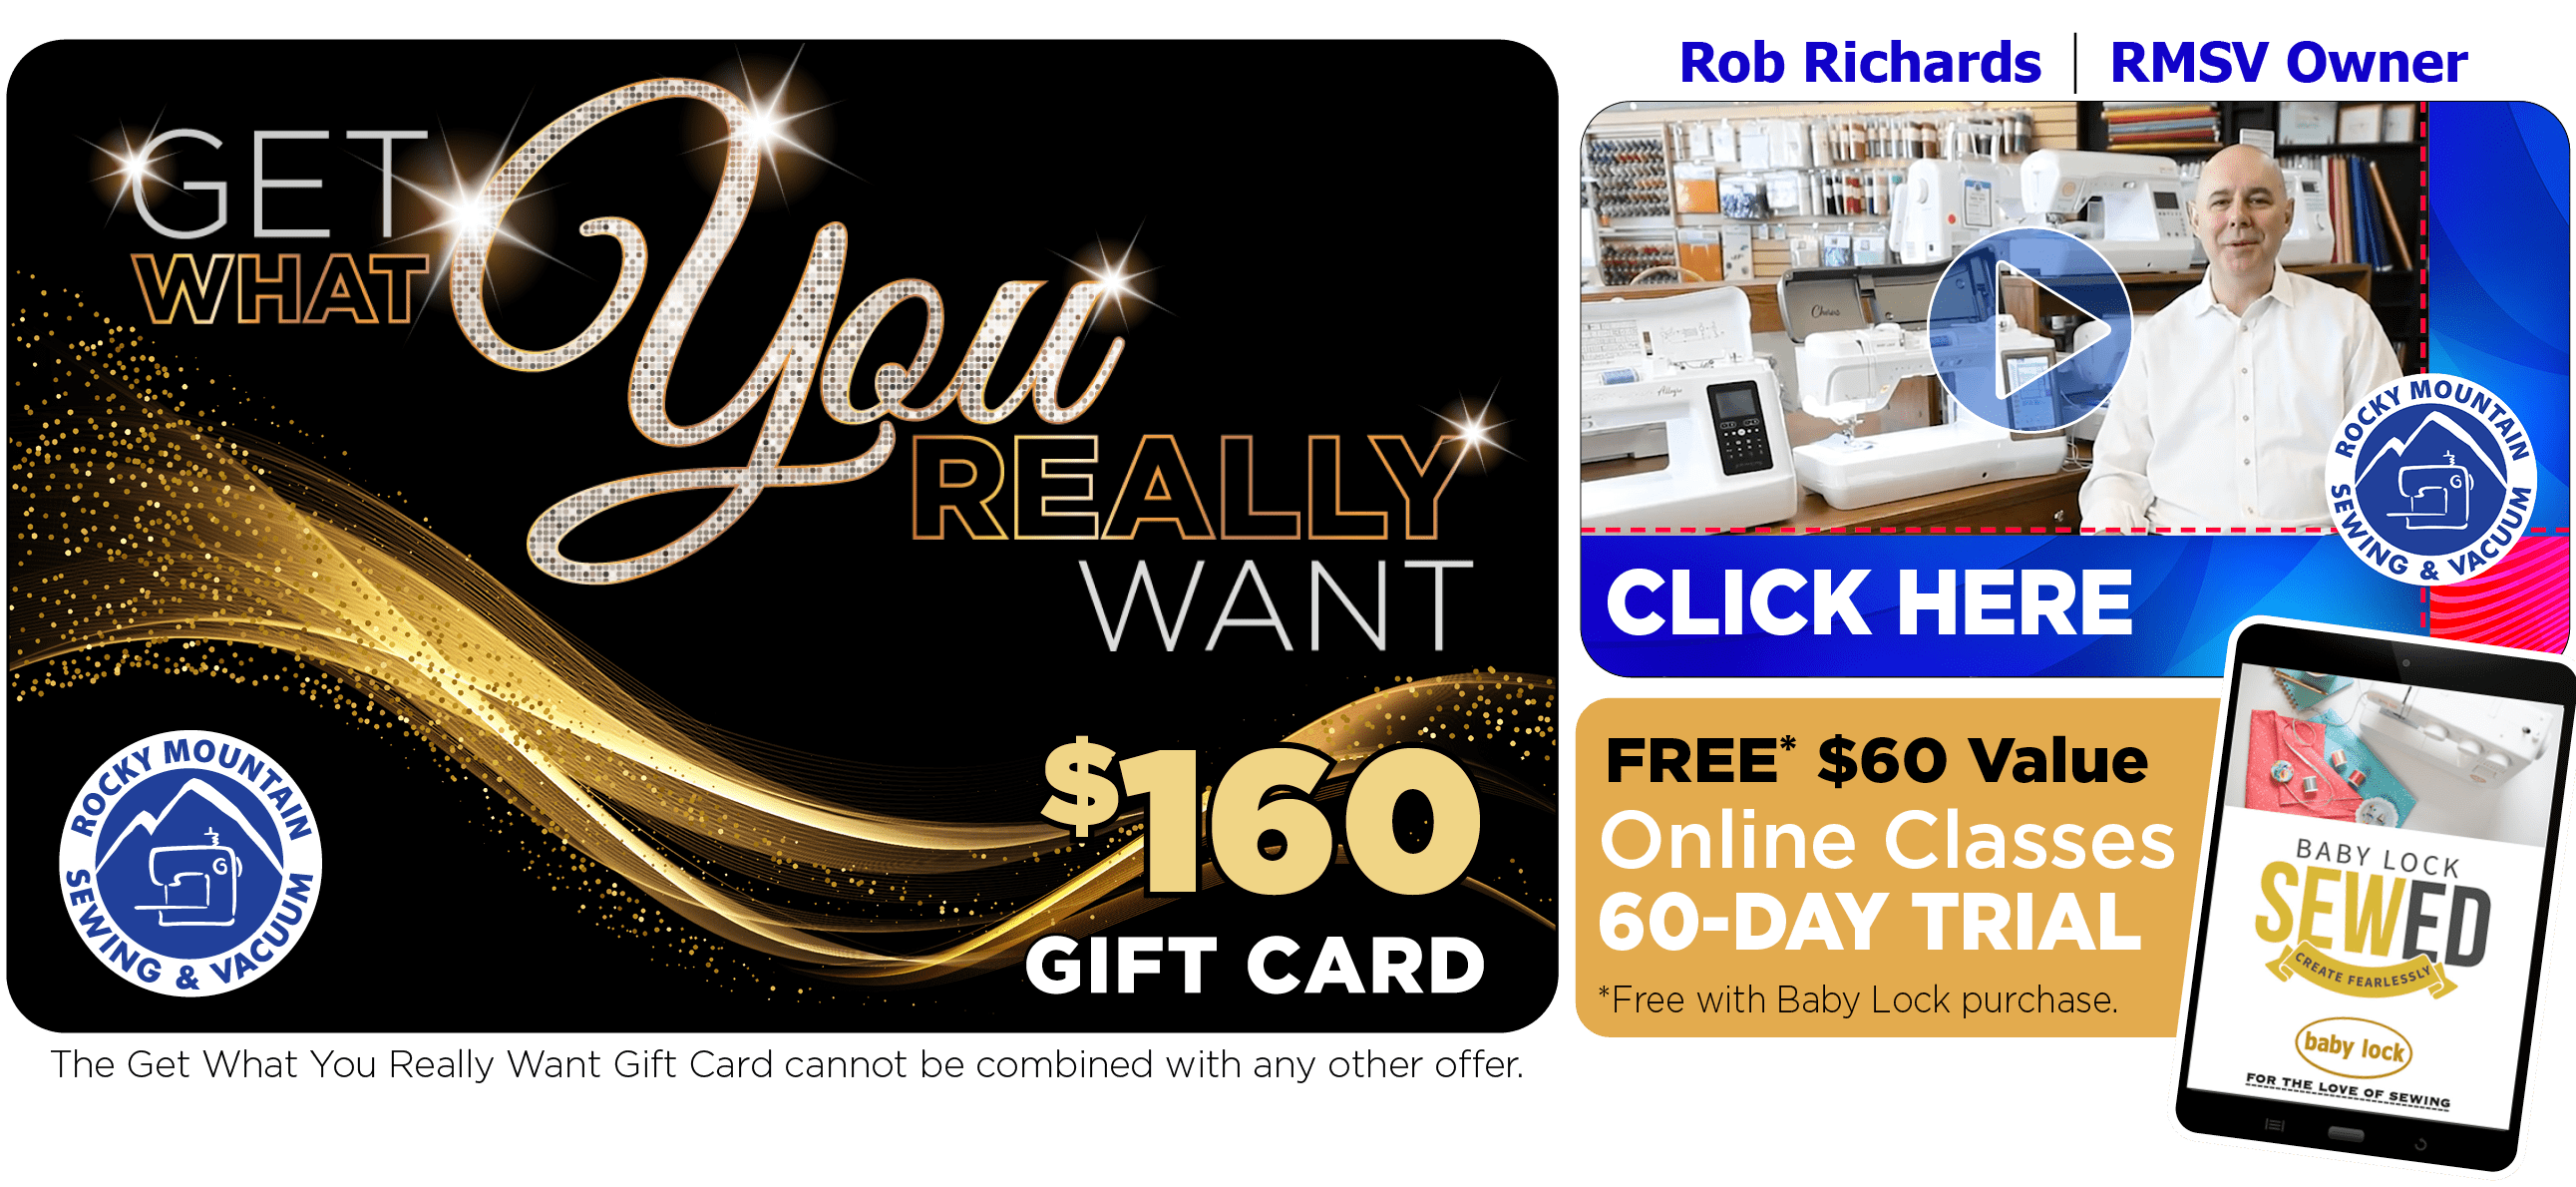 Get What You Really Want $160 Gift Card with Purchase